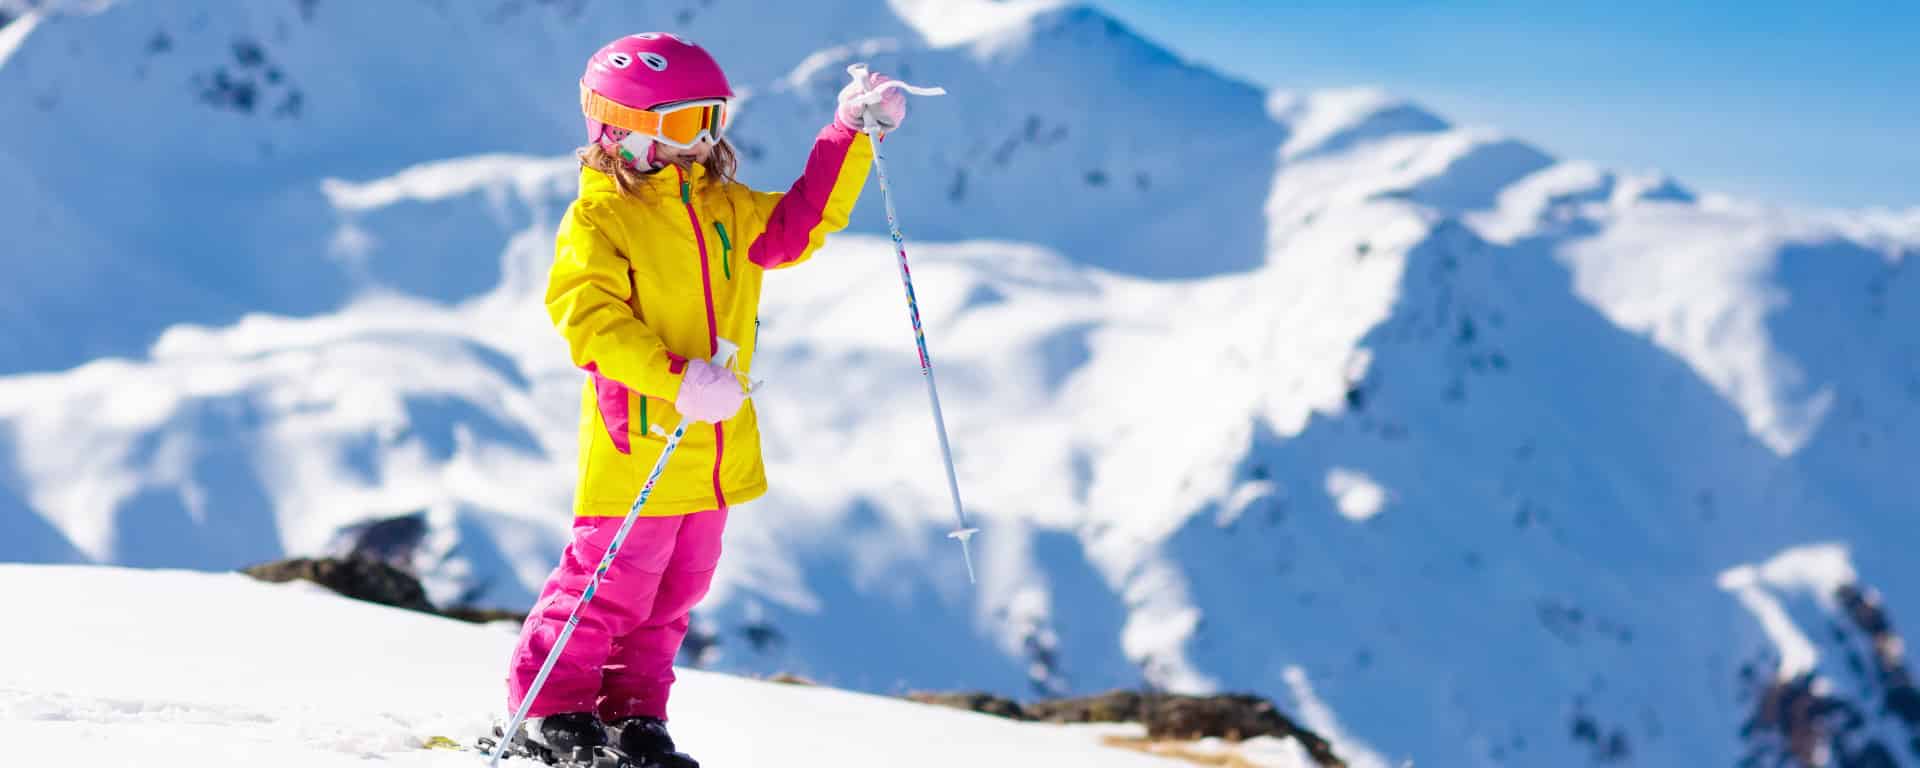 Skiing With Kids - Feature Image